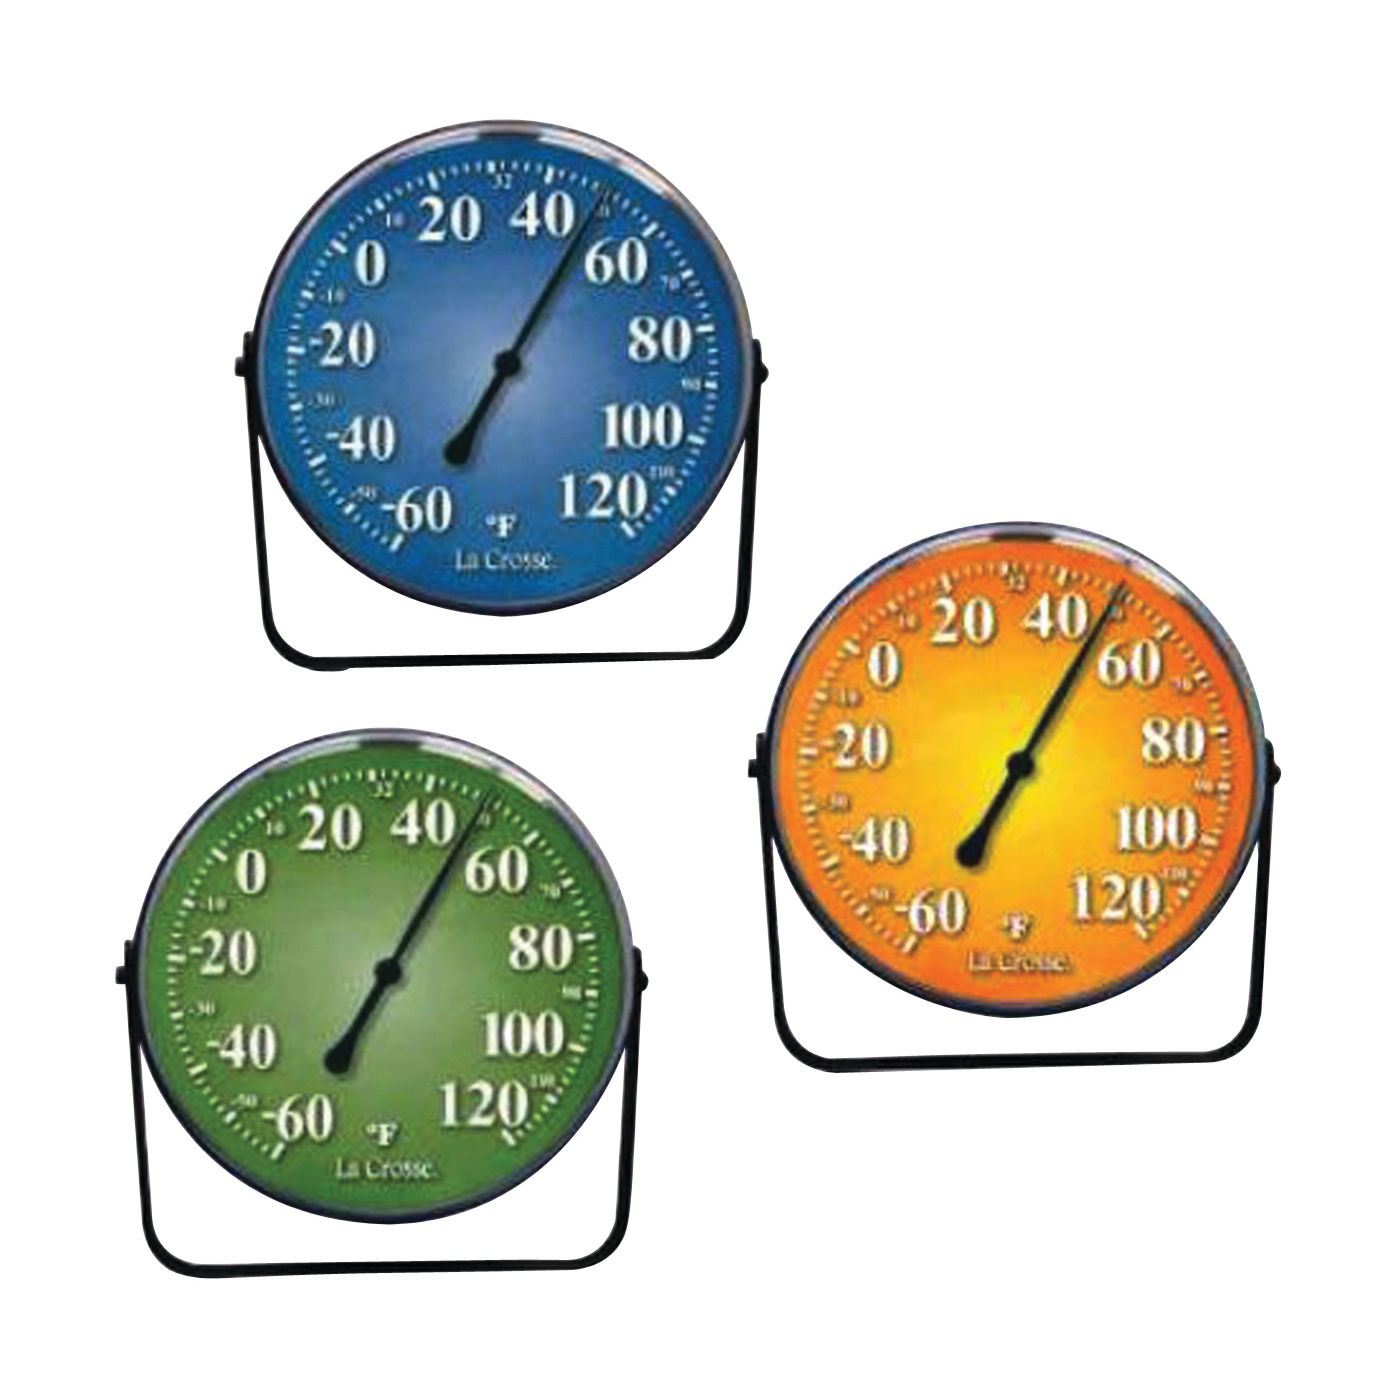 104-1512 Variety Pack Thermometer, 5 in Display, -60 to 120 deg F, Metal Casing